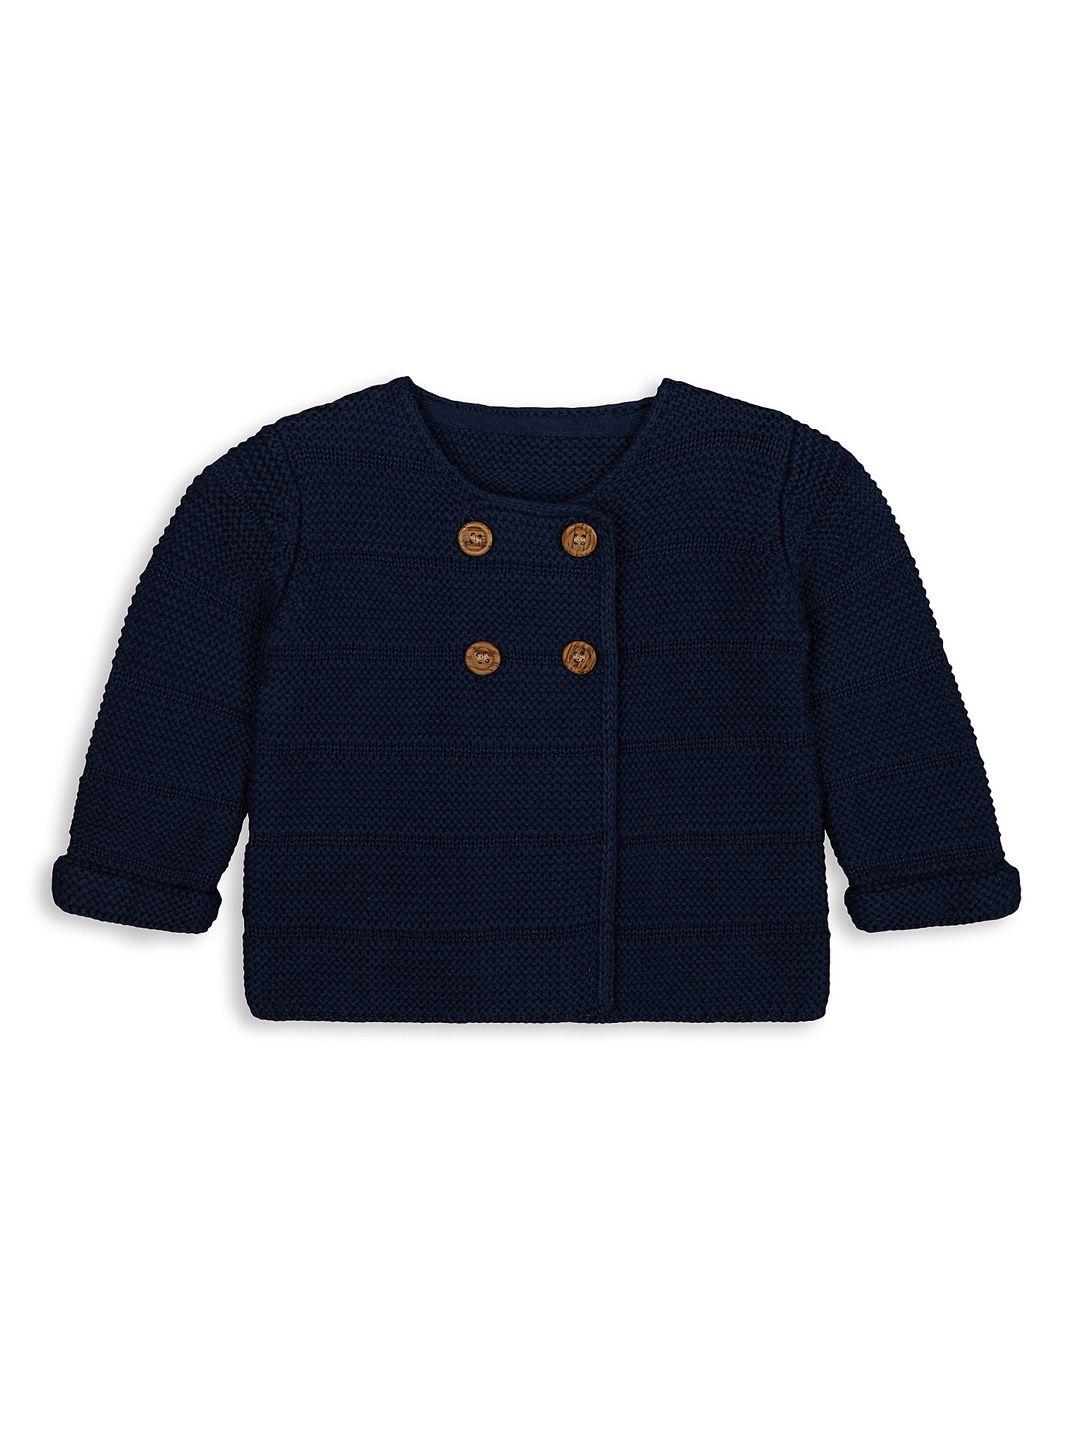 mothercare infant boys navy blue solid pure cotton cardigan